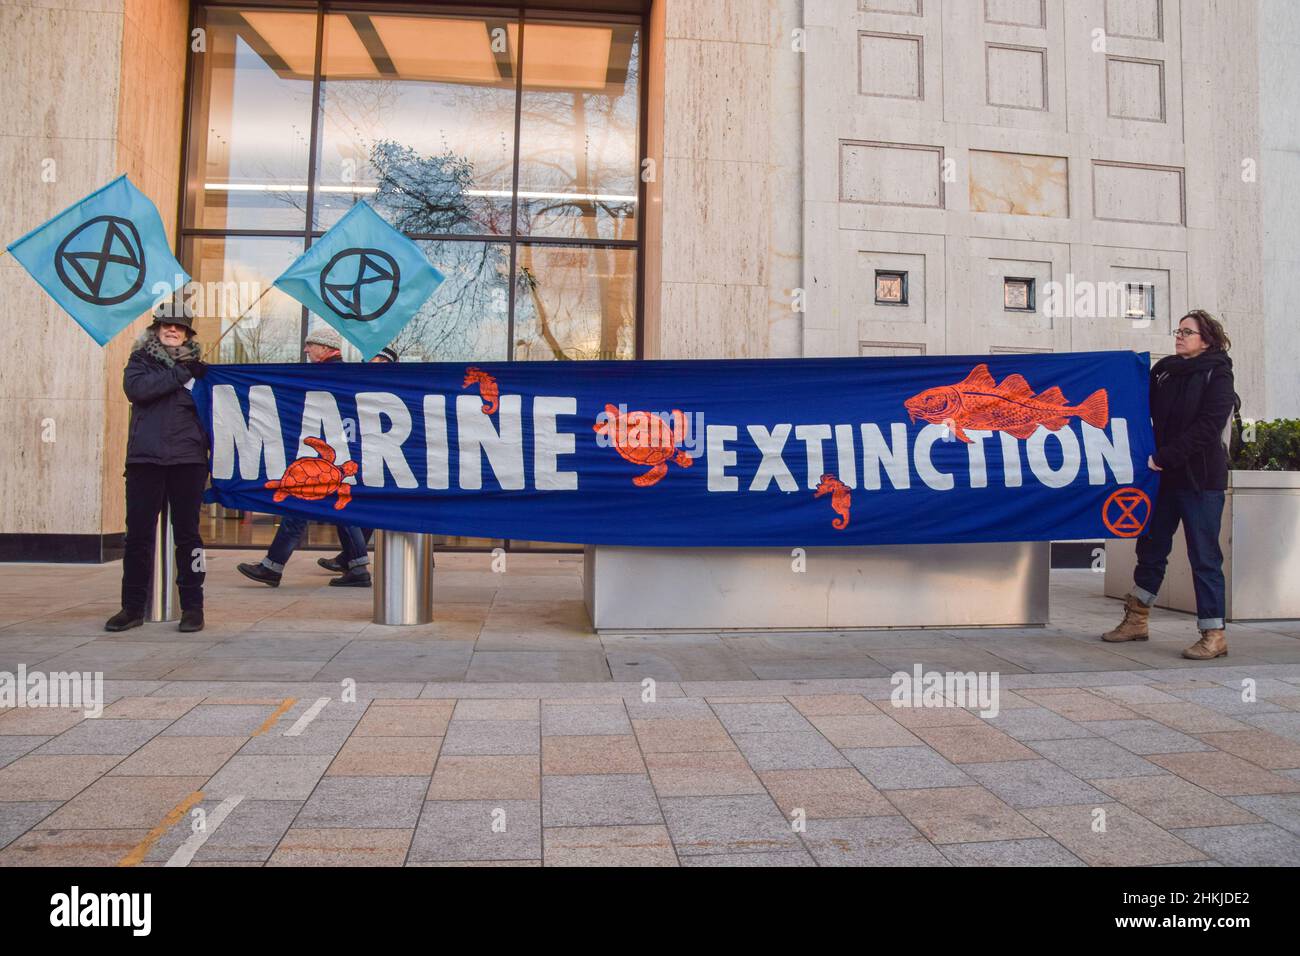 Demonstrators hold a 'Marine Extinction' banner during the protest outside Shell. Activists marched with a model whale from Parliament Square to Shell's London headquarters as part of the Global Coastline Rebellion, in protest against the destruction of oceans and ocean wildlife caused by fracking, drilling, seismic surveys and pollution by oil companies. (Photo by Vuk Valcic / SOPA Images/Sipa USA) Stock Photo